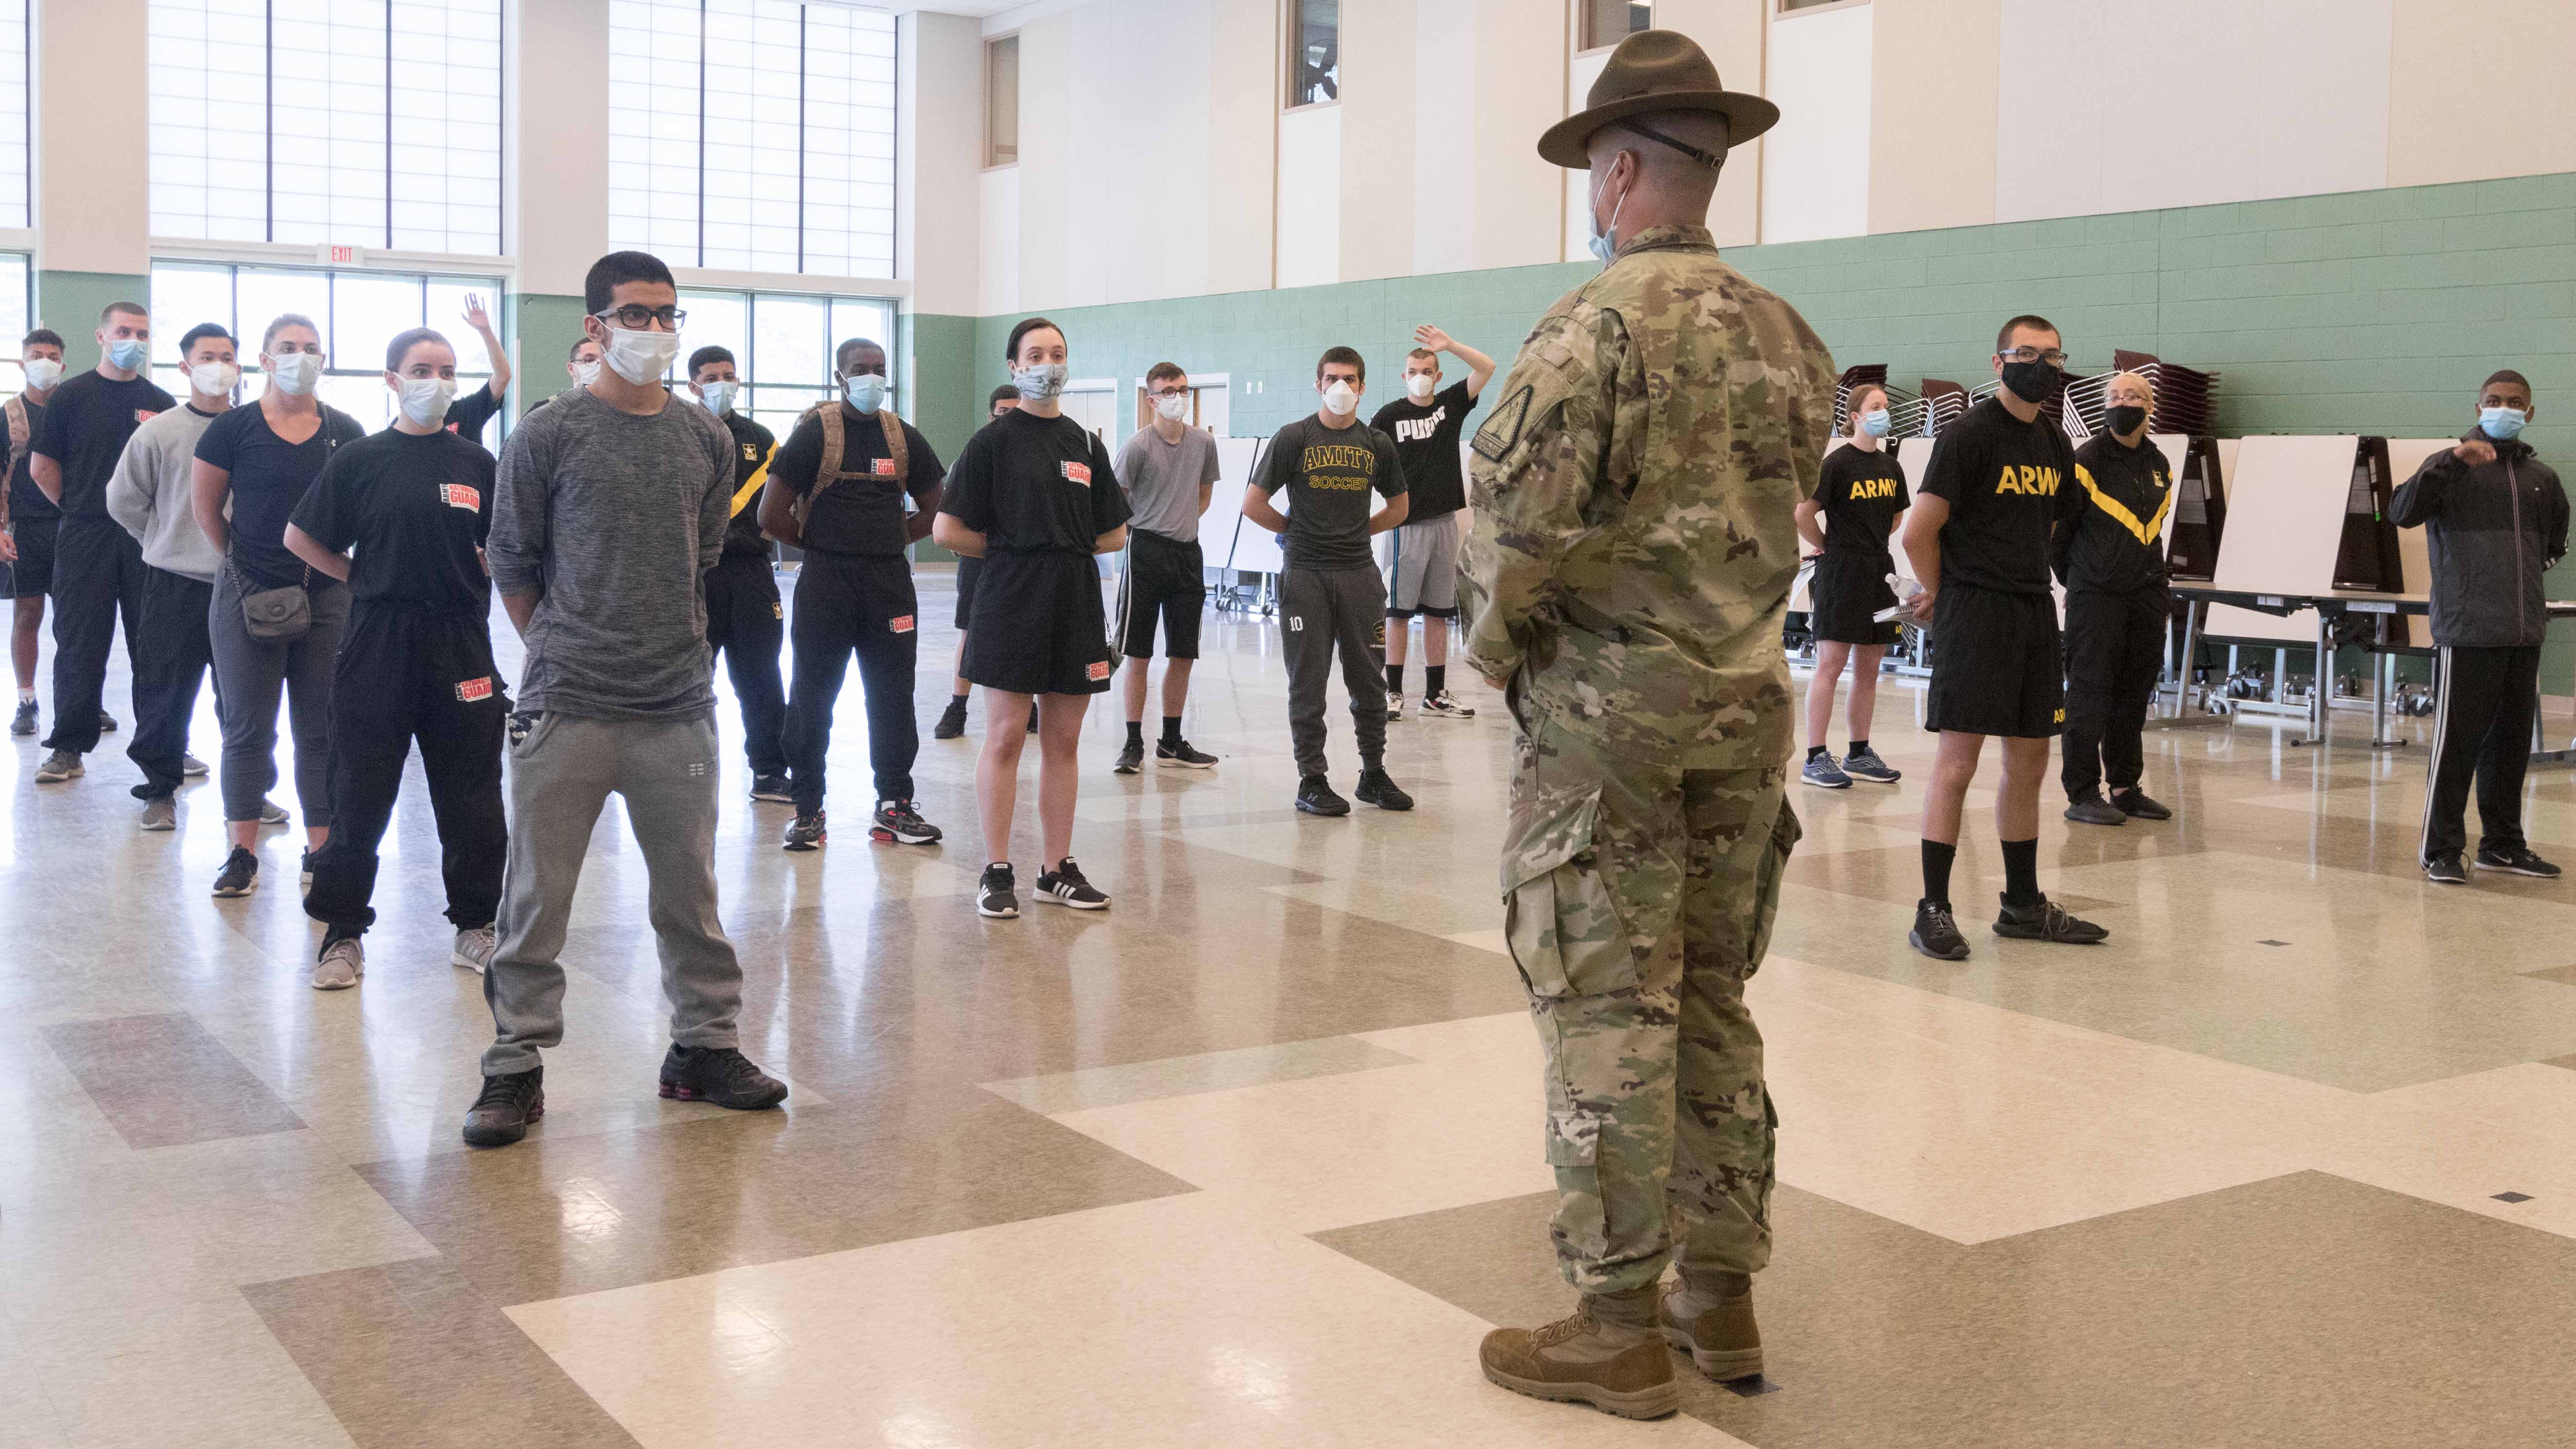 Recruits gather before a drill sergeant